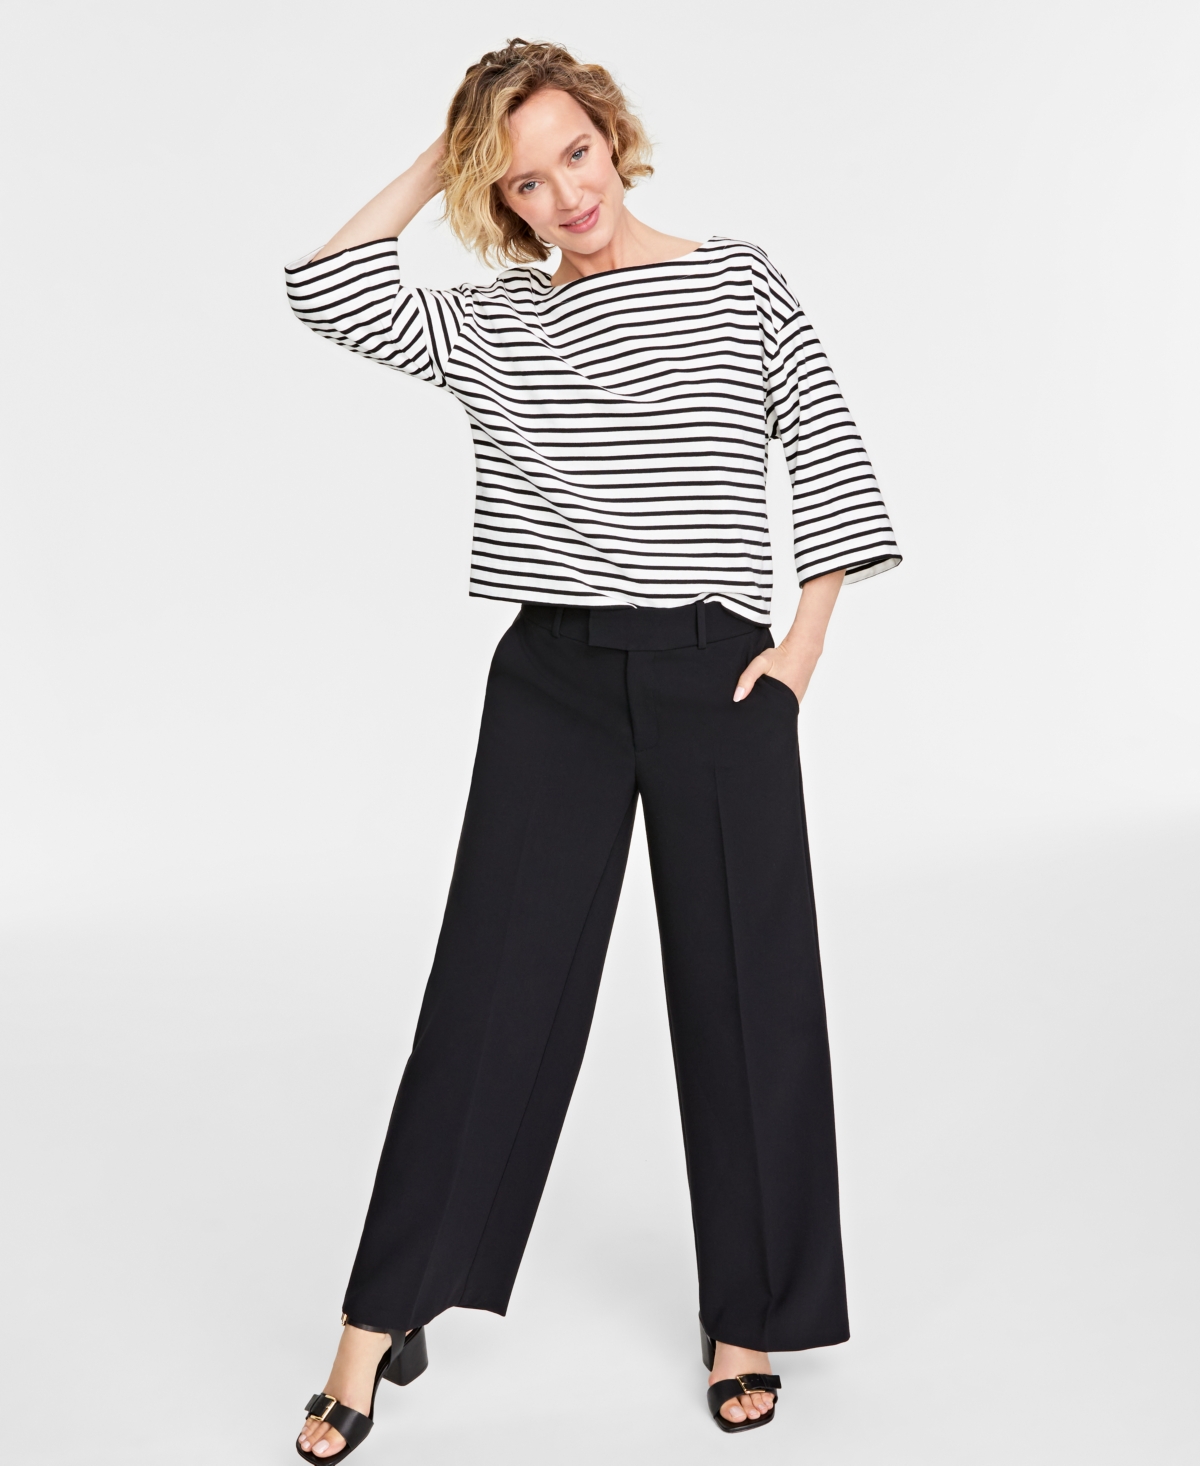 Women's Double-Weave Wide-Leg Pants, Regular and Short Length, Created for Macy's - Deep Black